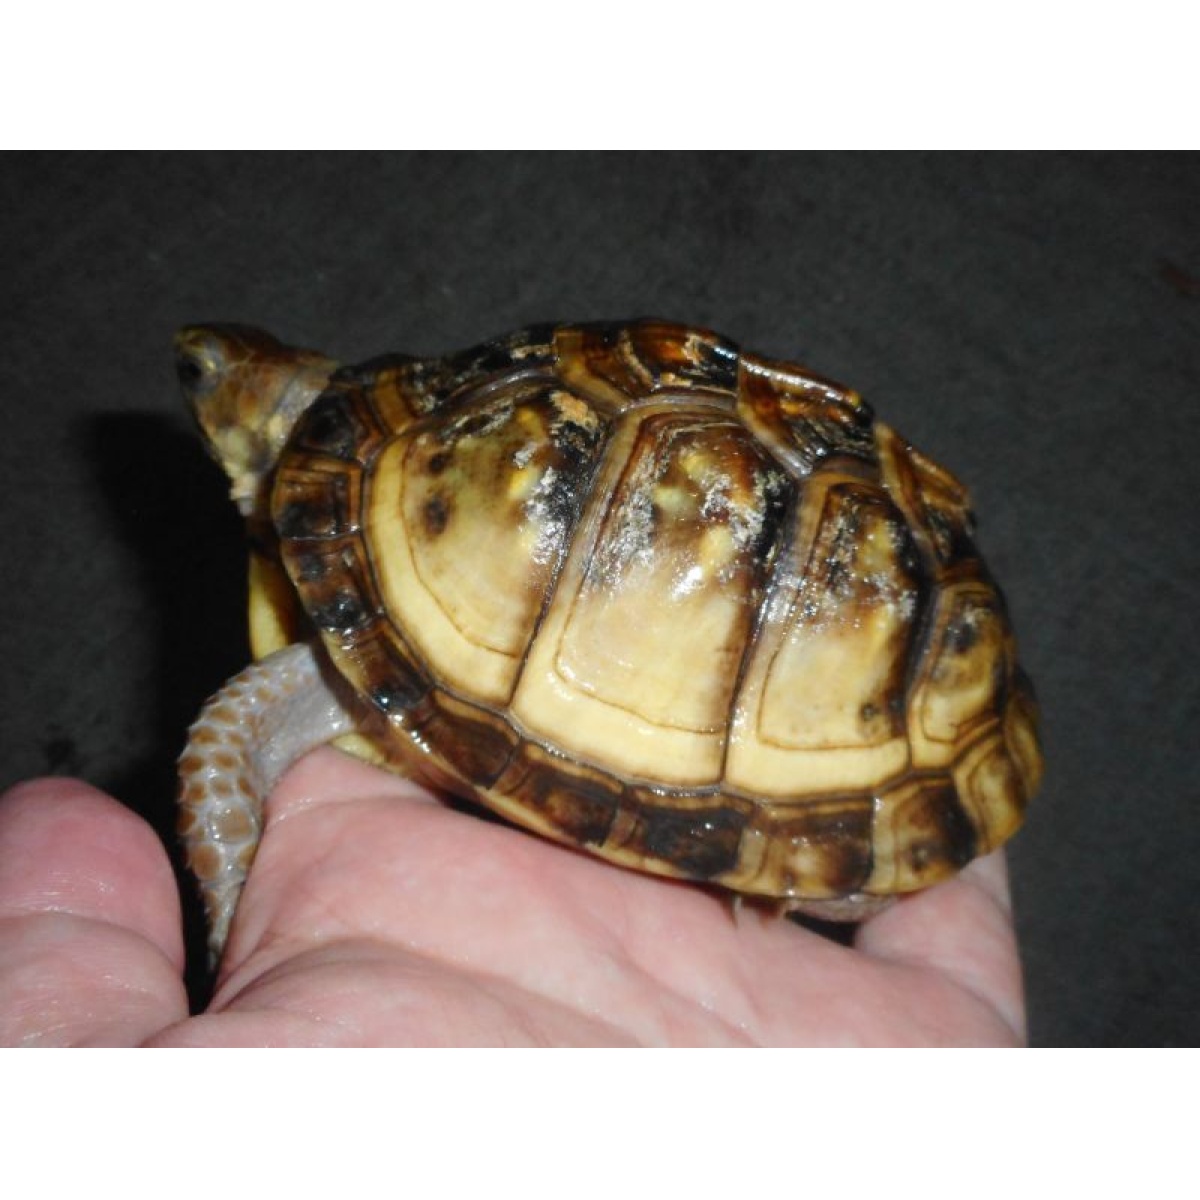 The Complete North American Box Turtle 亀 飼育 洋書 トウブハコガメ 